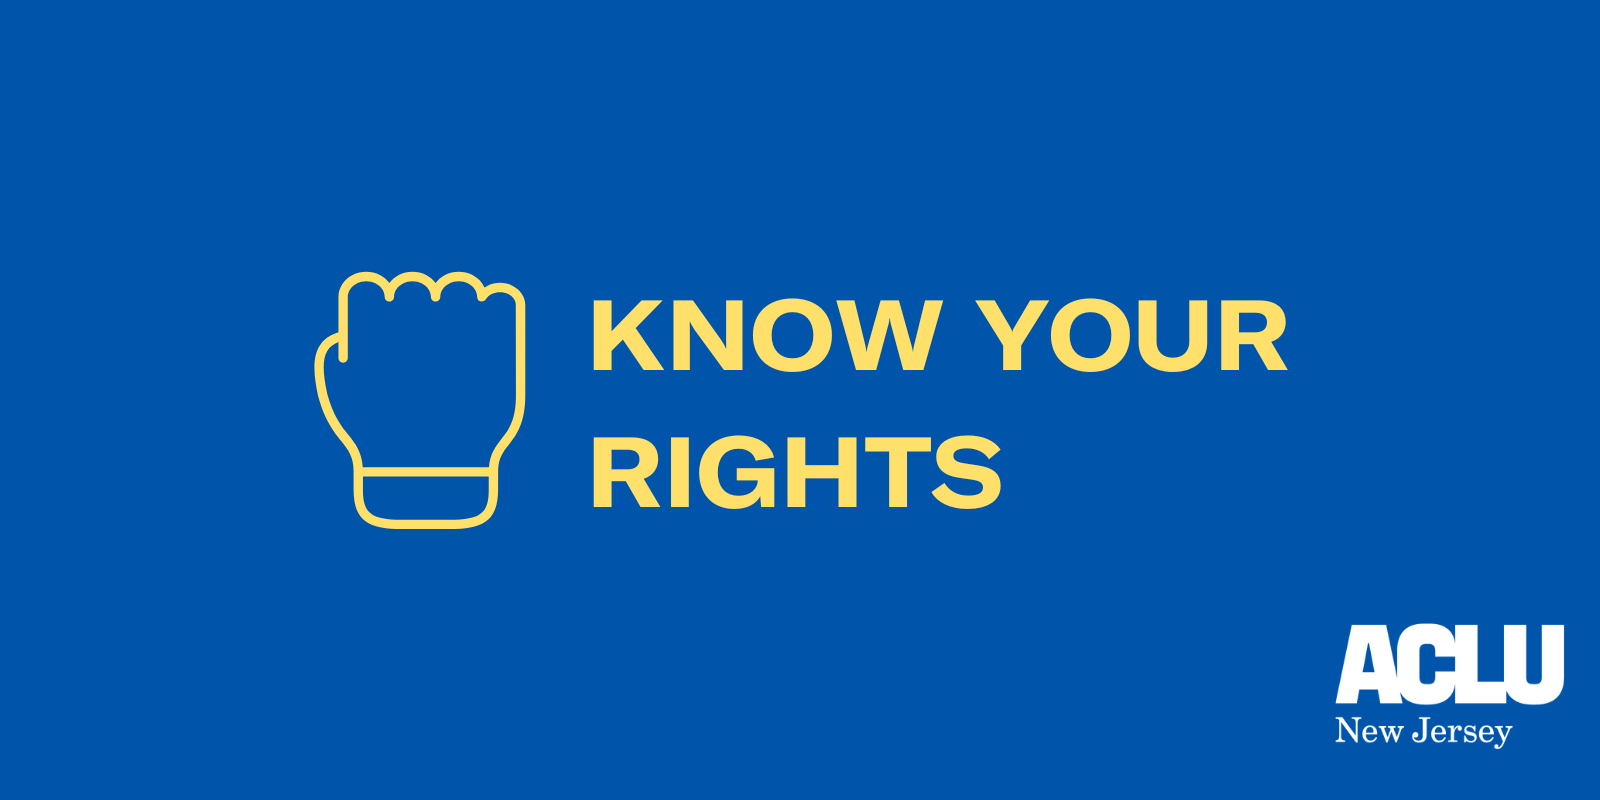 A blue background with an illustrated raised fist on the left and text that reads "Know Your Rights" on the right.